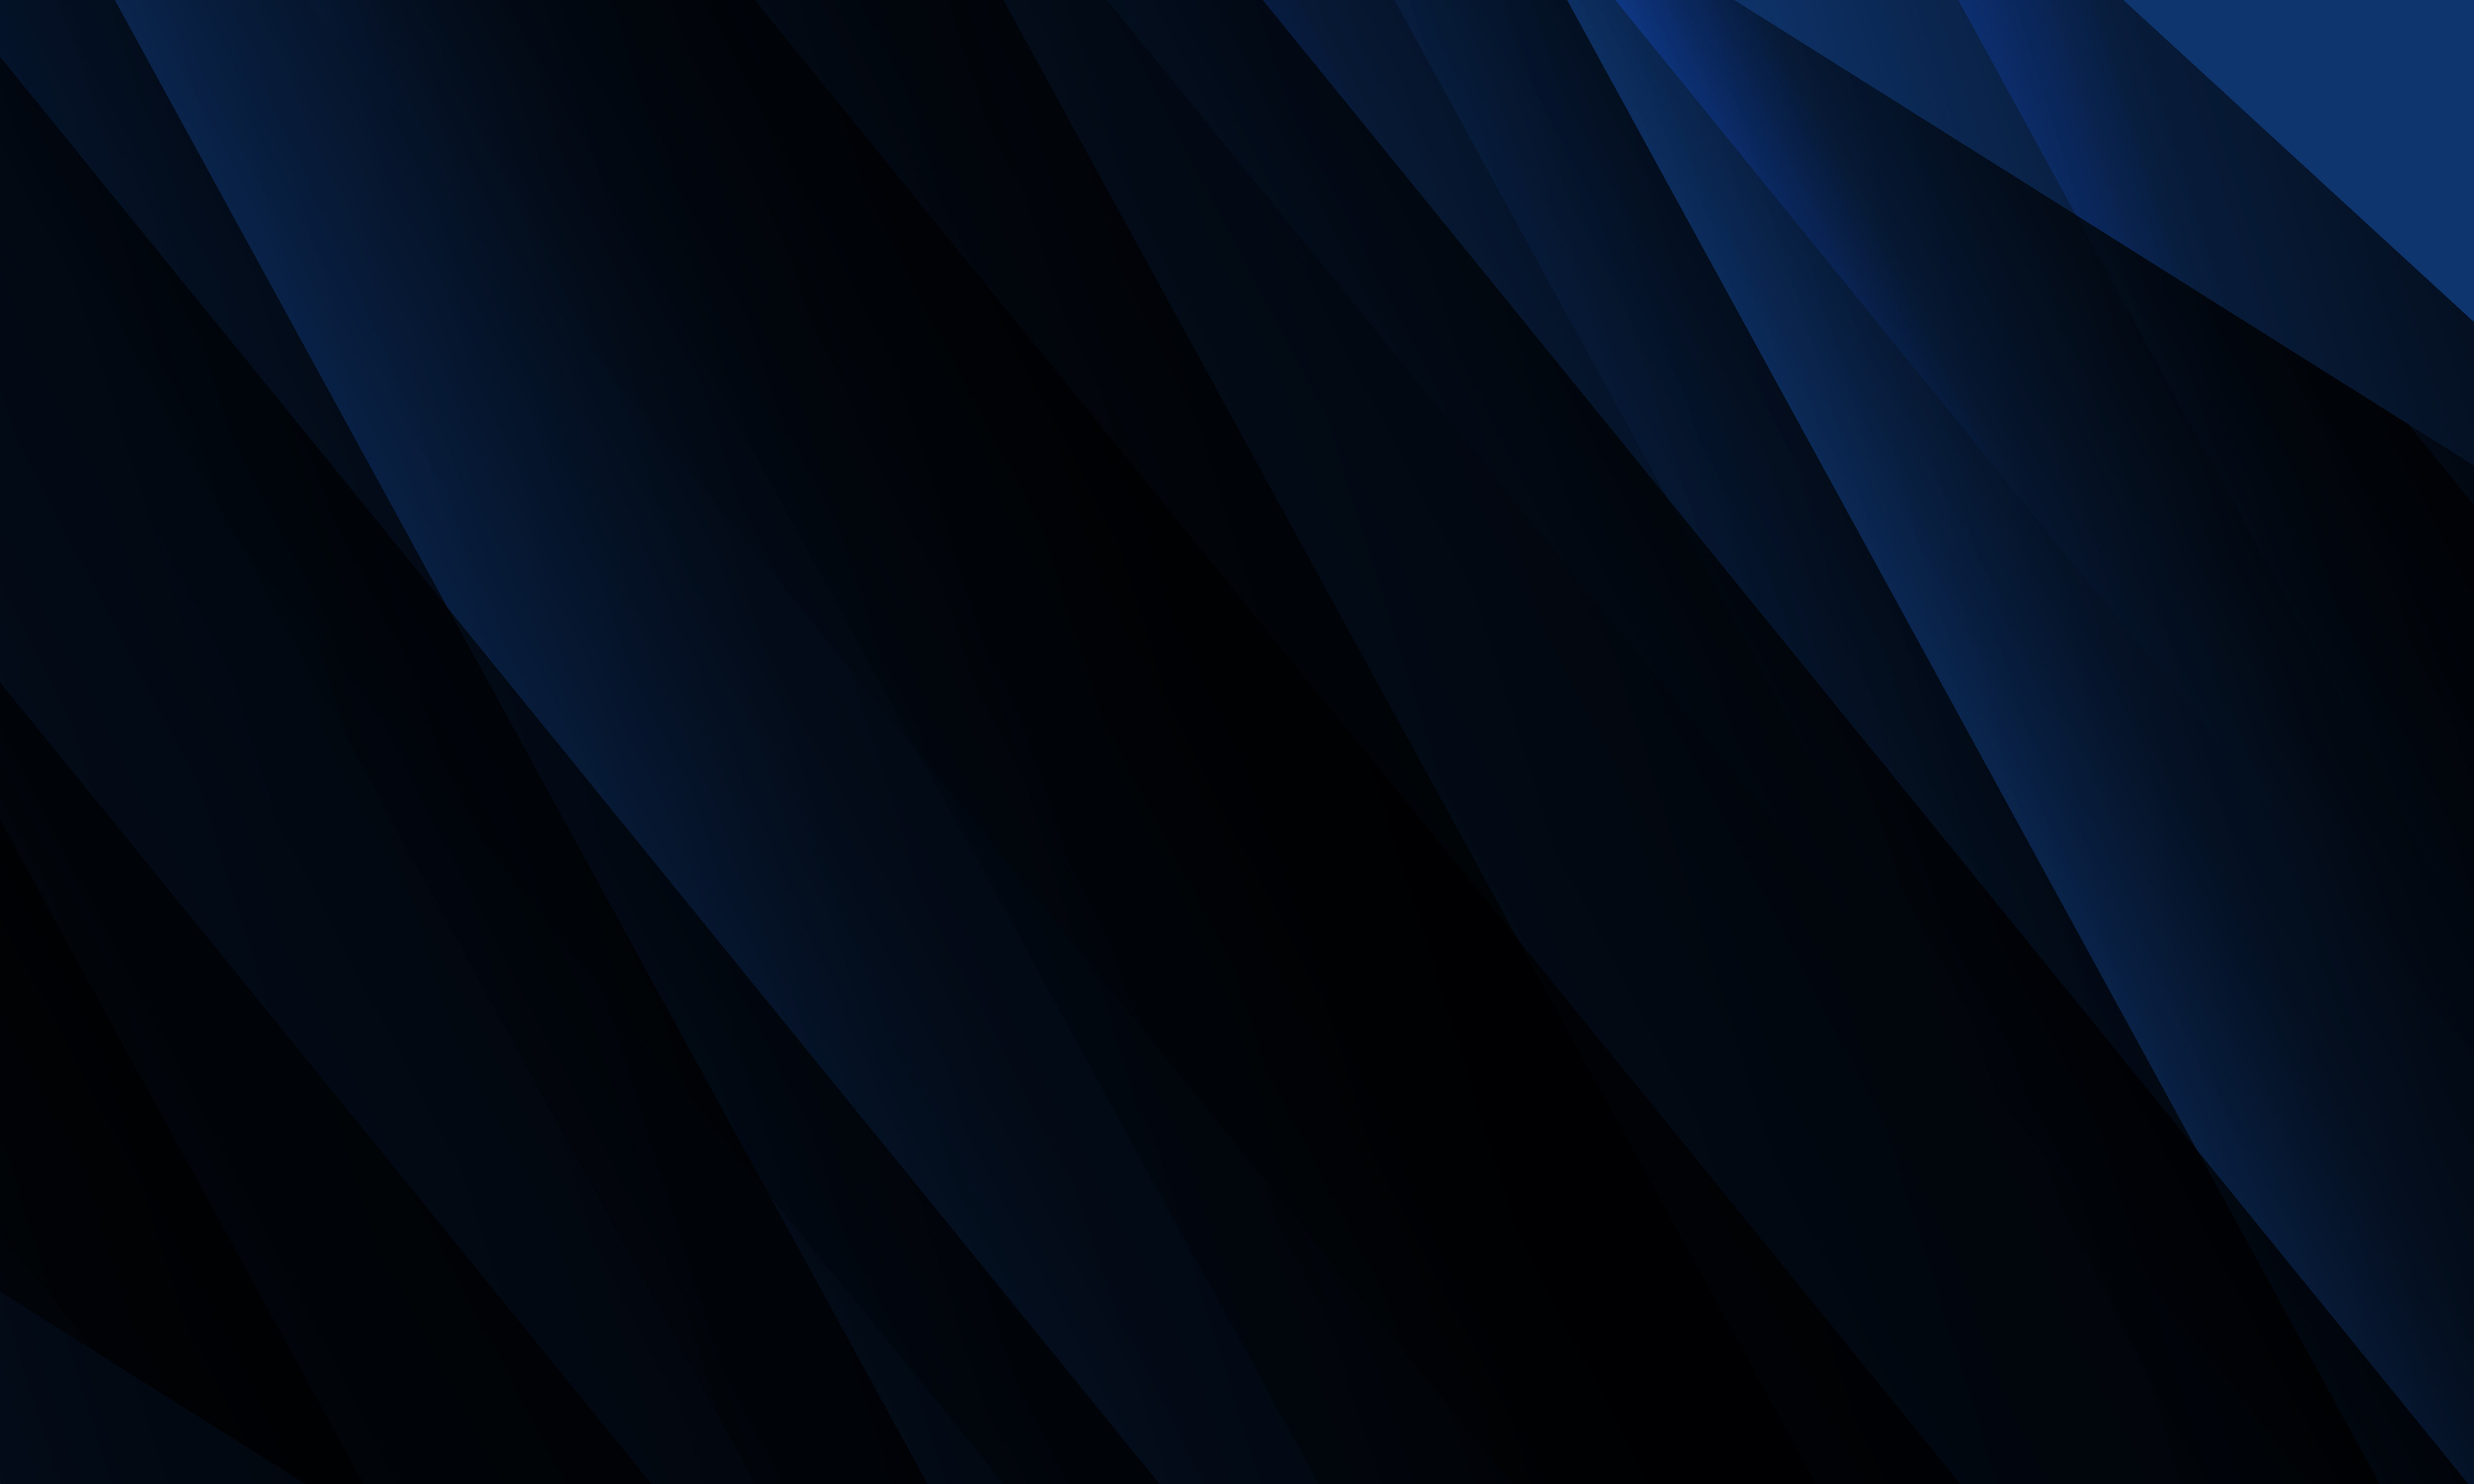 Dark blue abstract background with diagonal geometric shapes